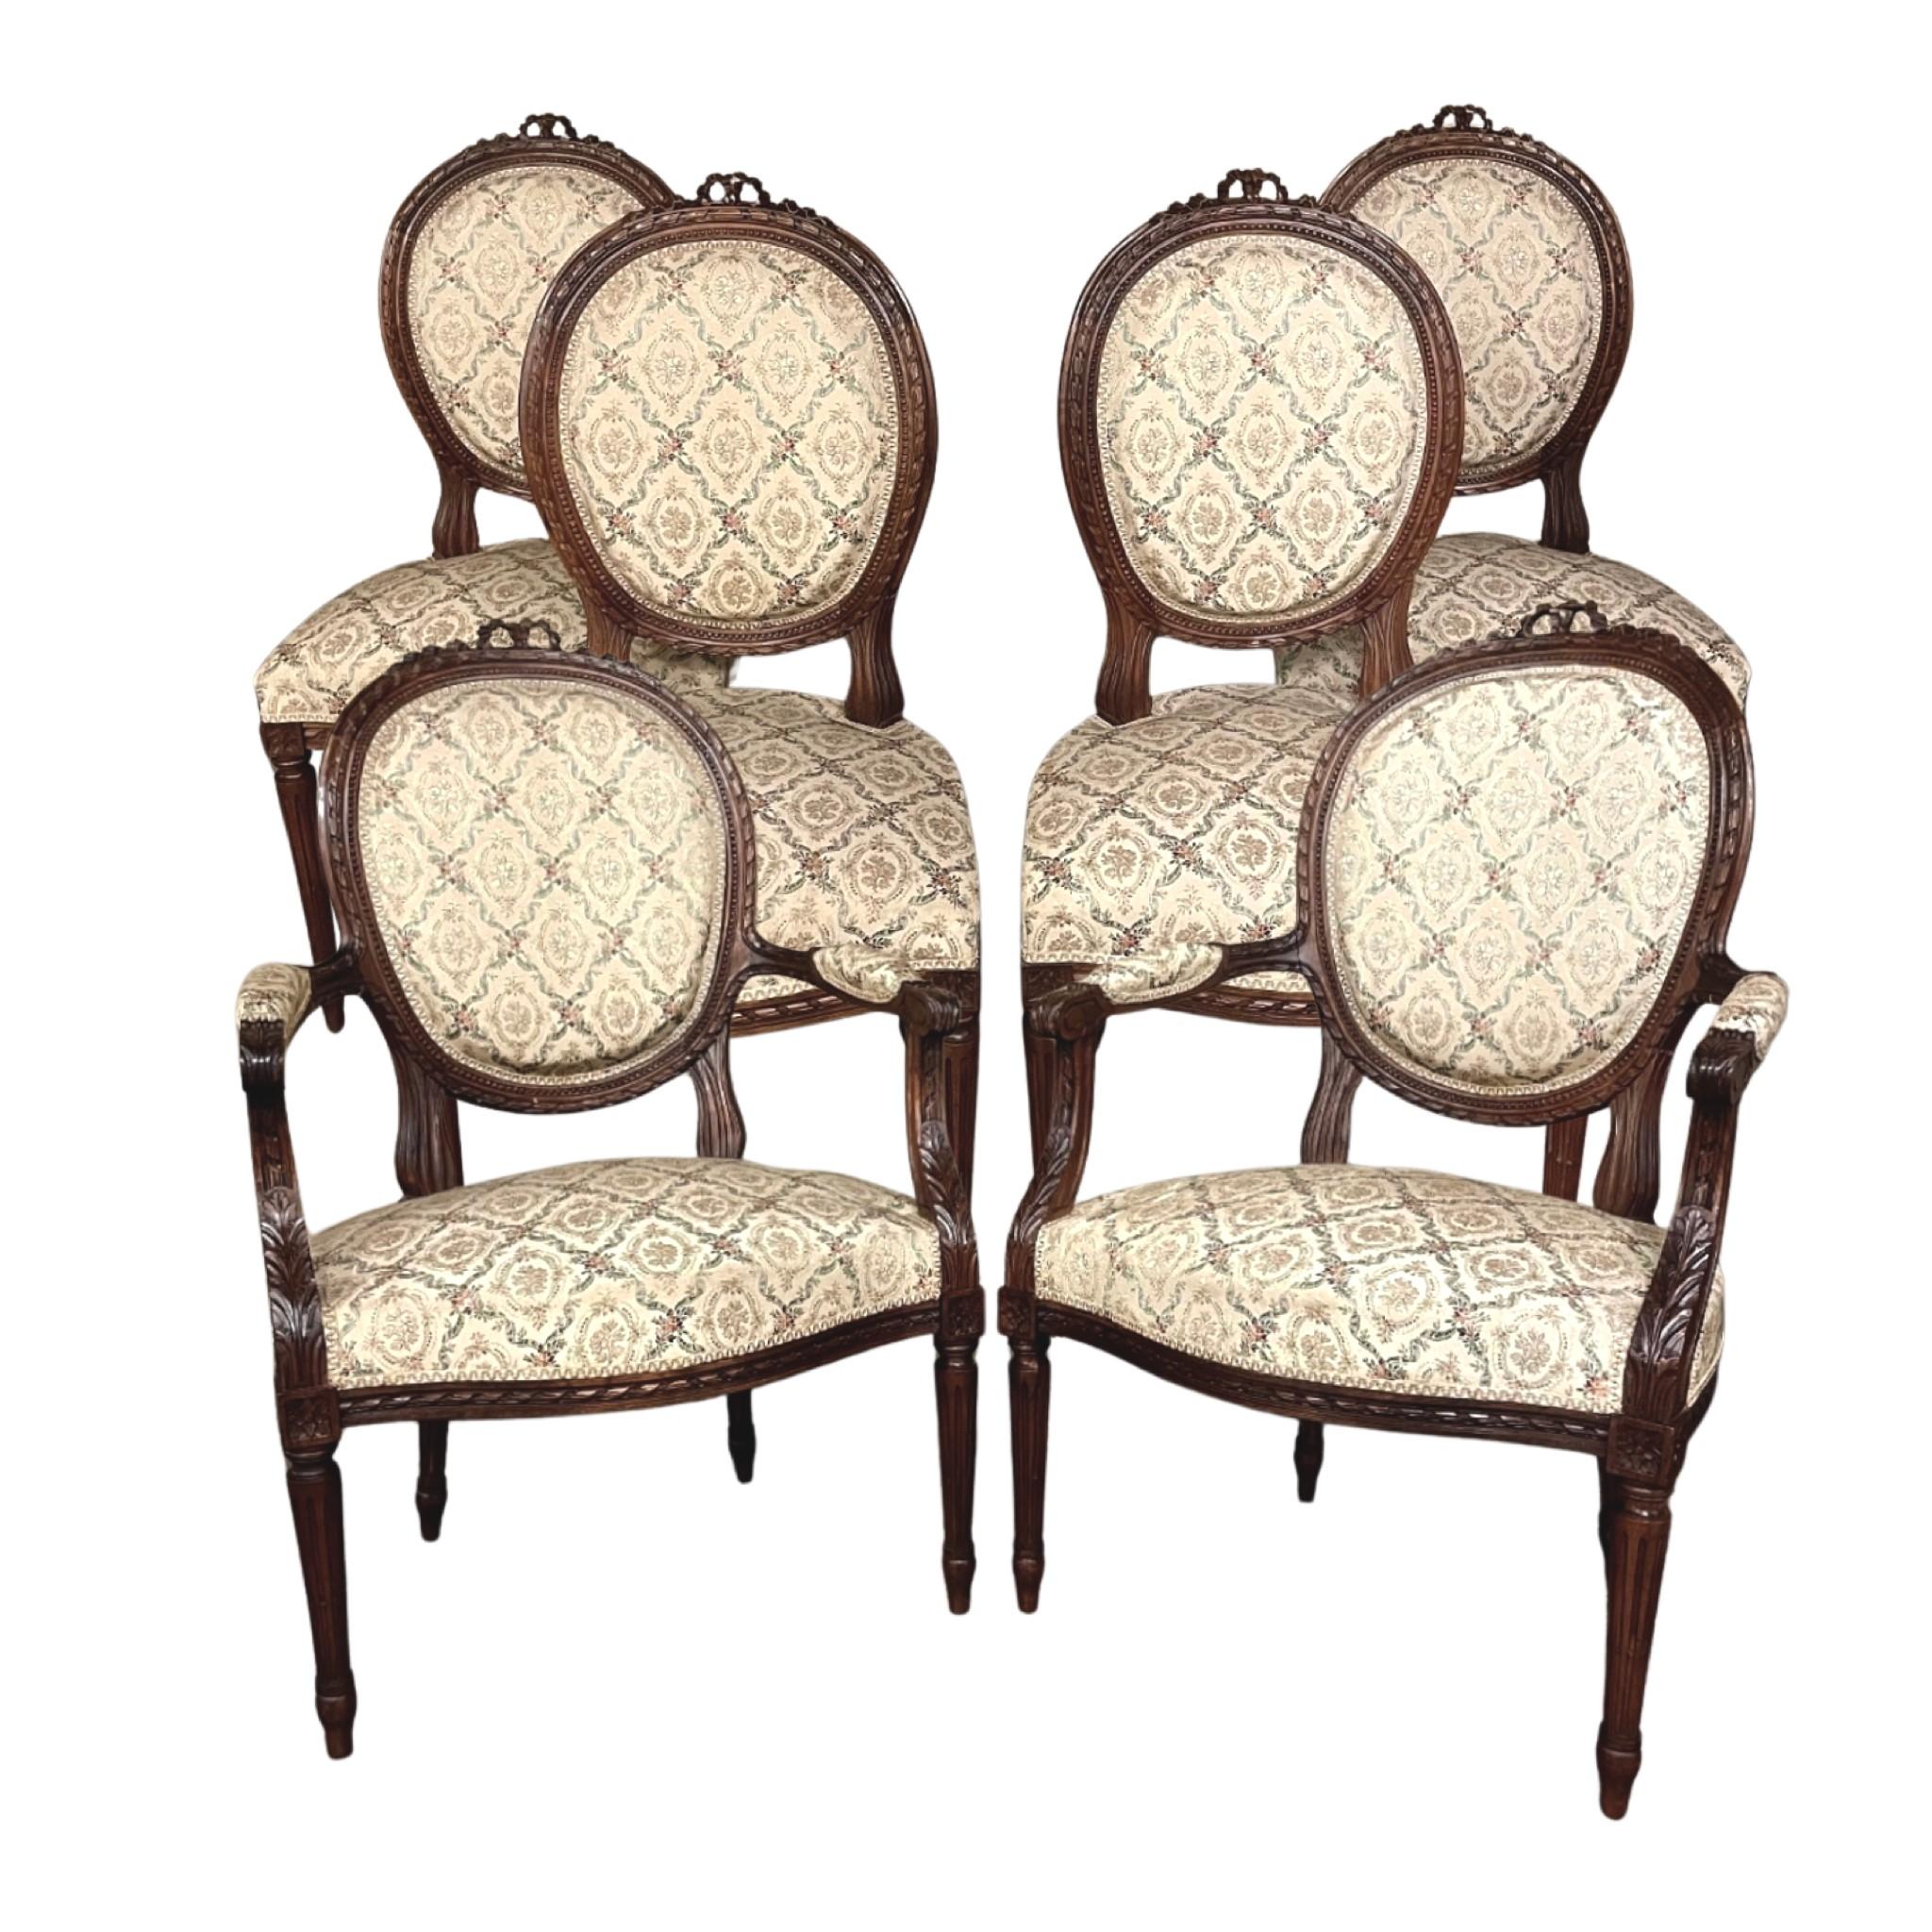 Set of Four 19th Century French Louis XVI Walnut Chairs is truly a timeless classic! Featuring curved oval seatbacks and generous seats, the set offers surprising comfort, and the very high quality of the upholstery ensures decades of enjoyment with